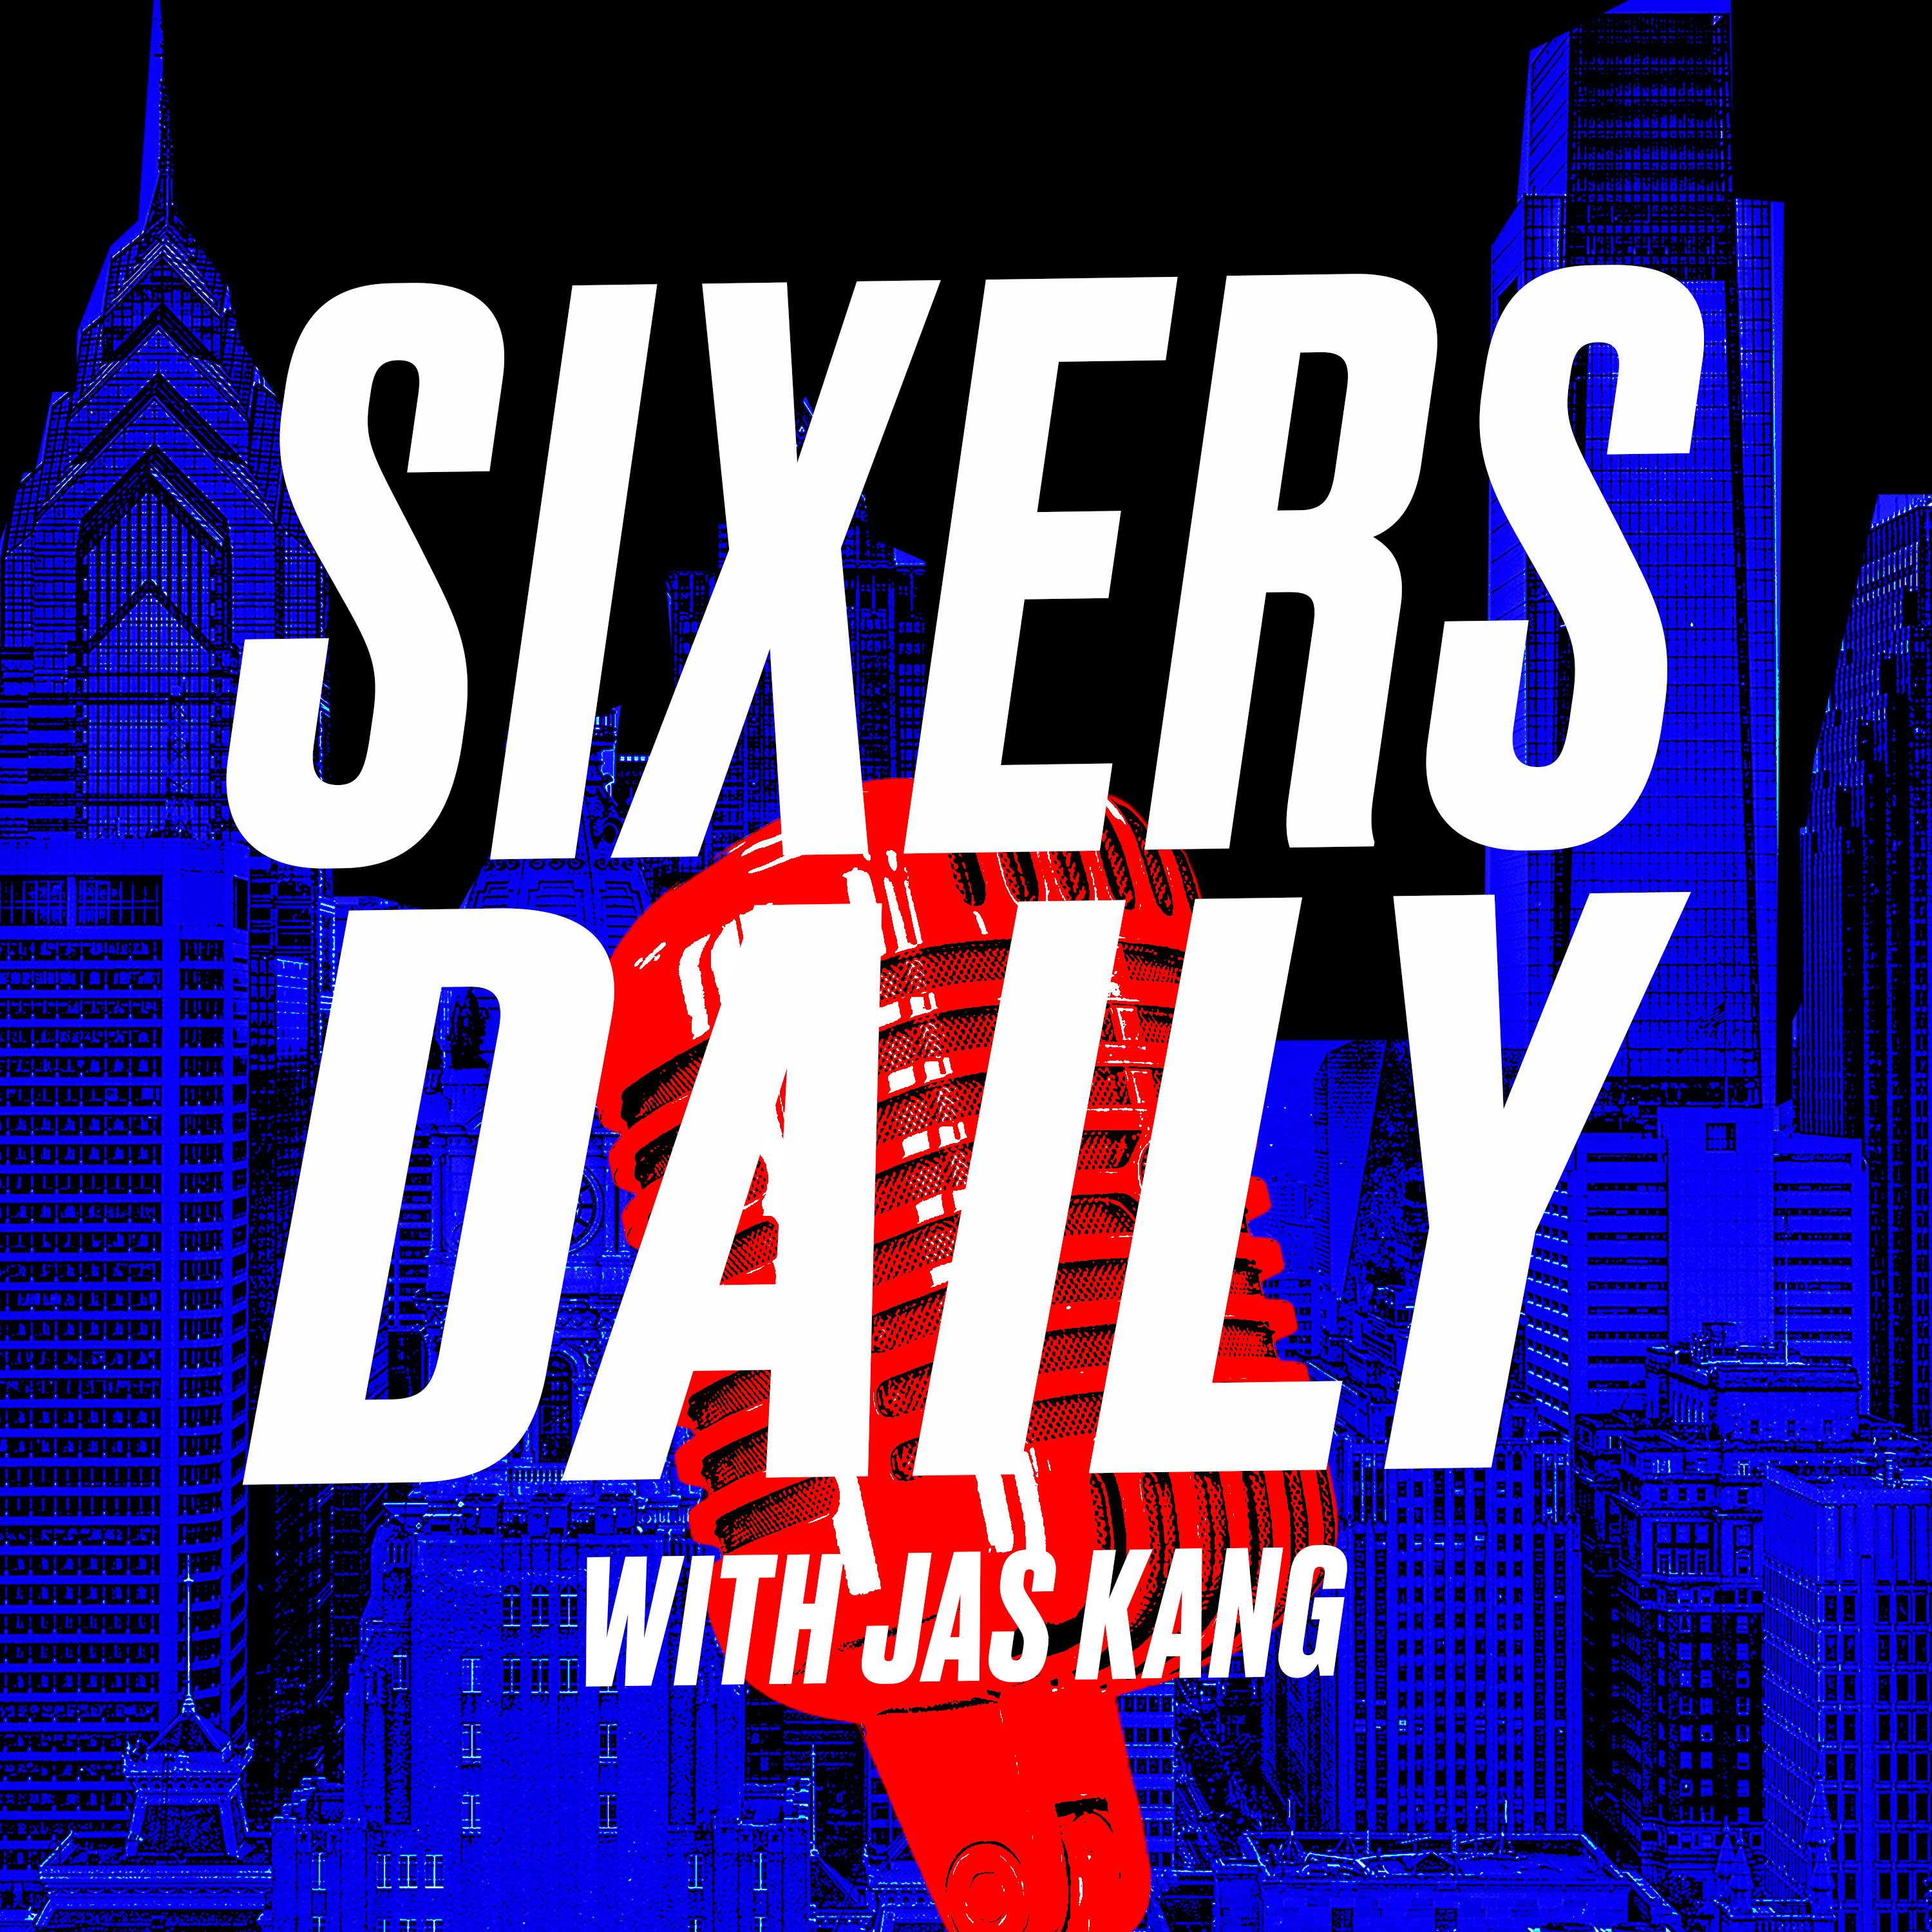 Sixers Daily with Jas Kang - Joel Embiid gets snubbed from a First Team All-NBA selection, plus a review of Tyrese Maxey's breakout season. With Jackson Frank.